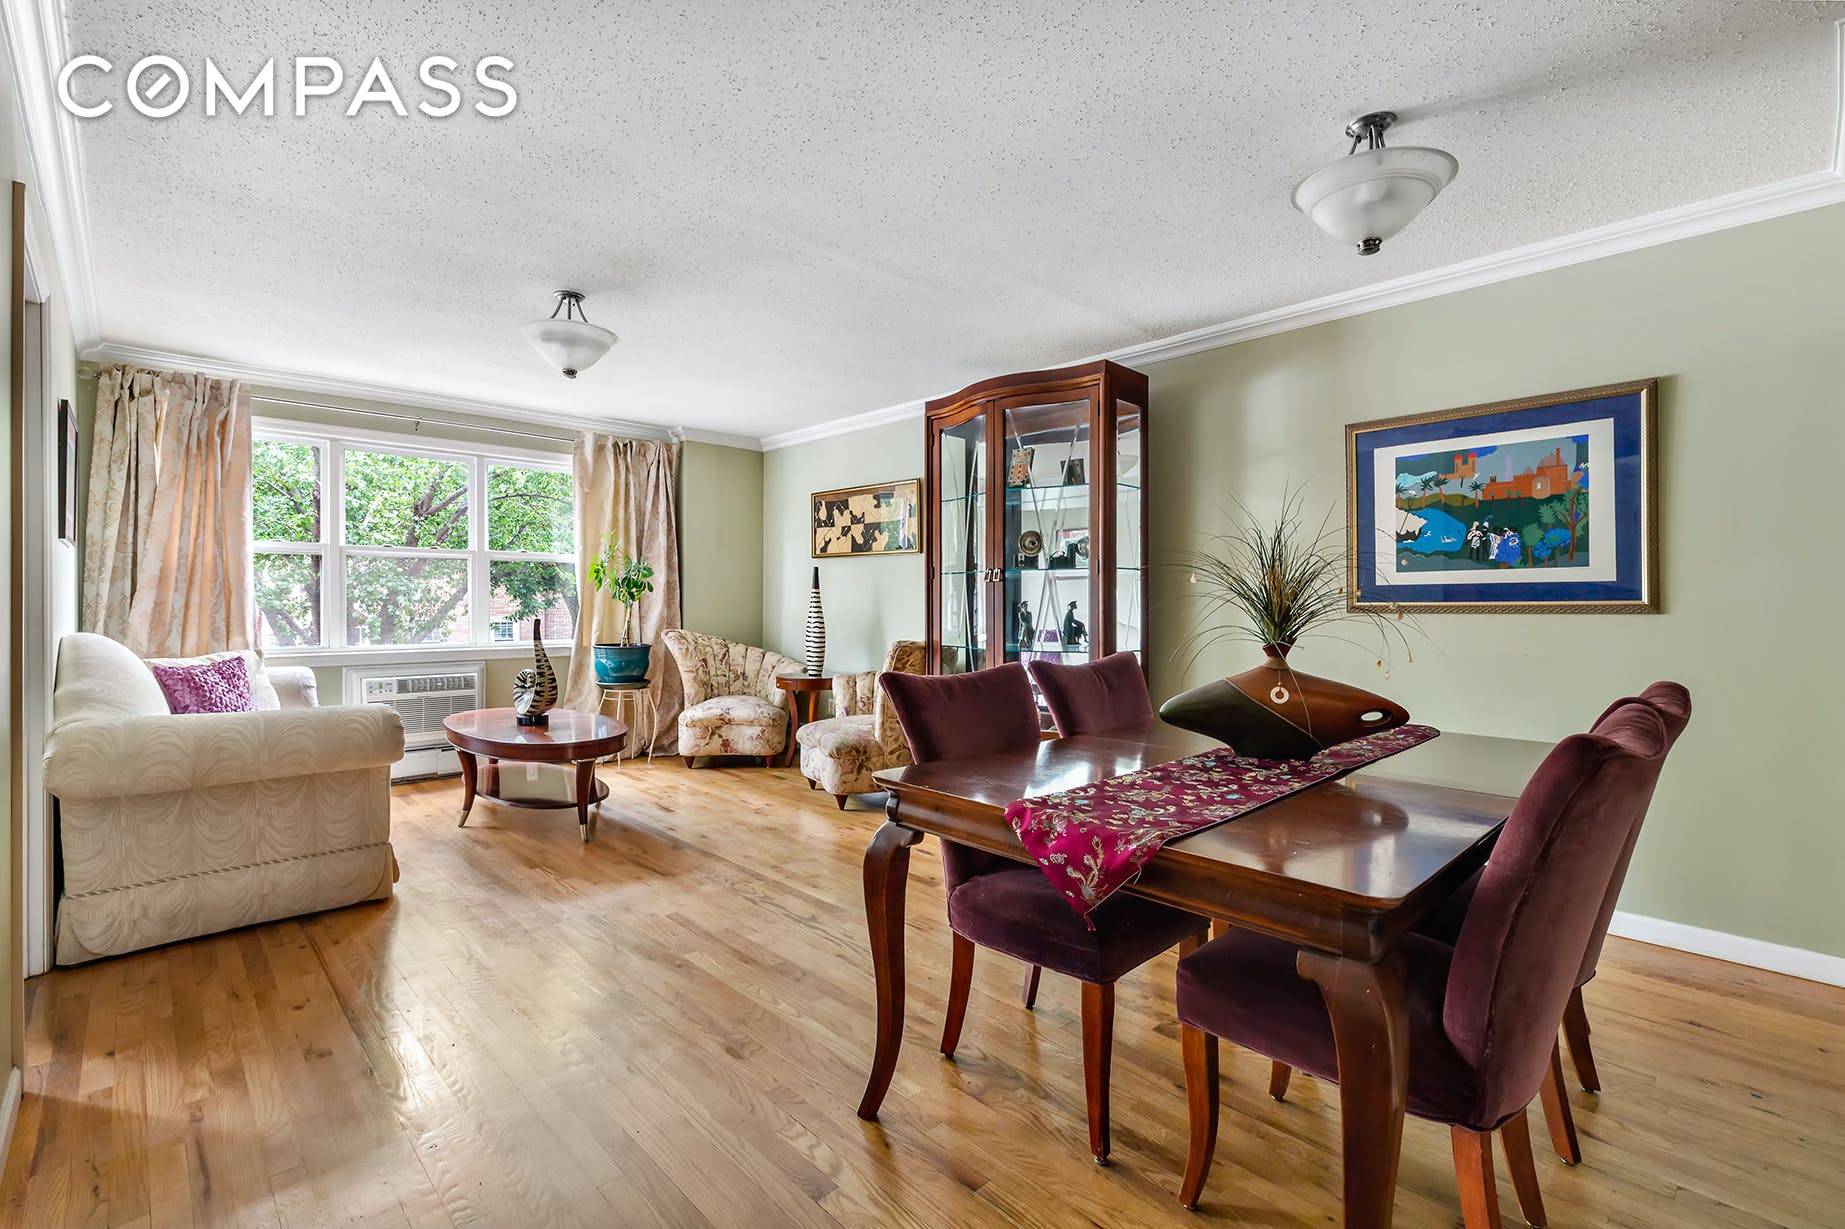 48 Underhill Avenue is a sprawling 3 family townhouse perfectly positioned in Prospect Heights.